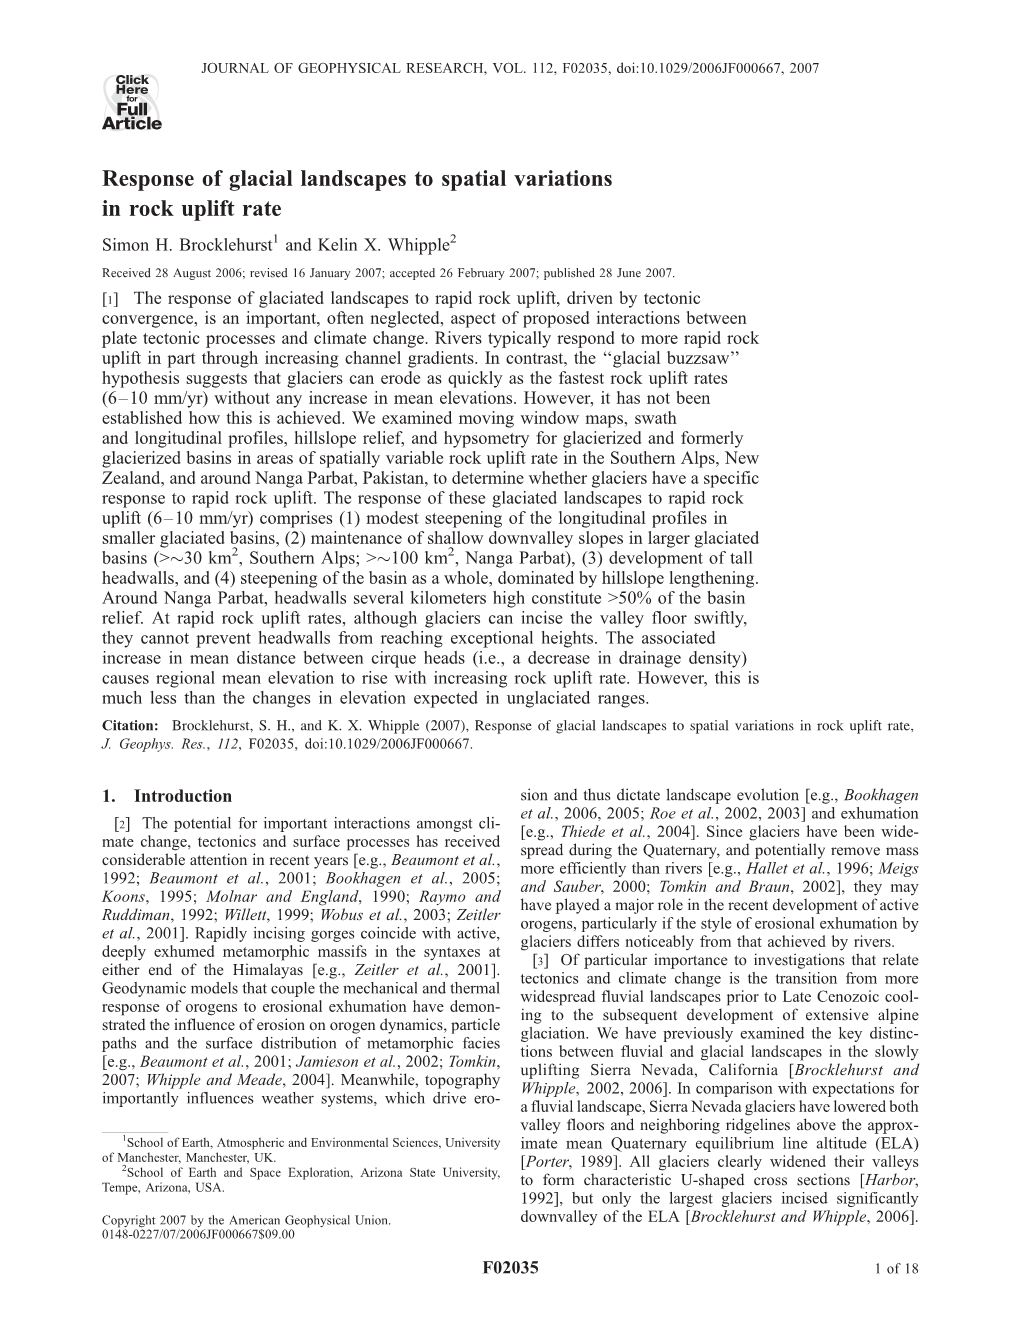 1 Brocklehurst, S. H., and K. X. Whipple, 2007, Response of Glacial Landscapes to Spatial Variations in Rock